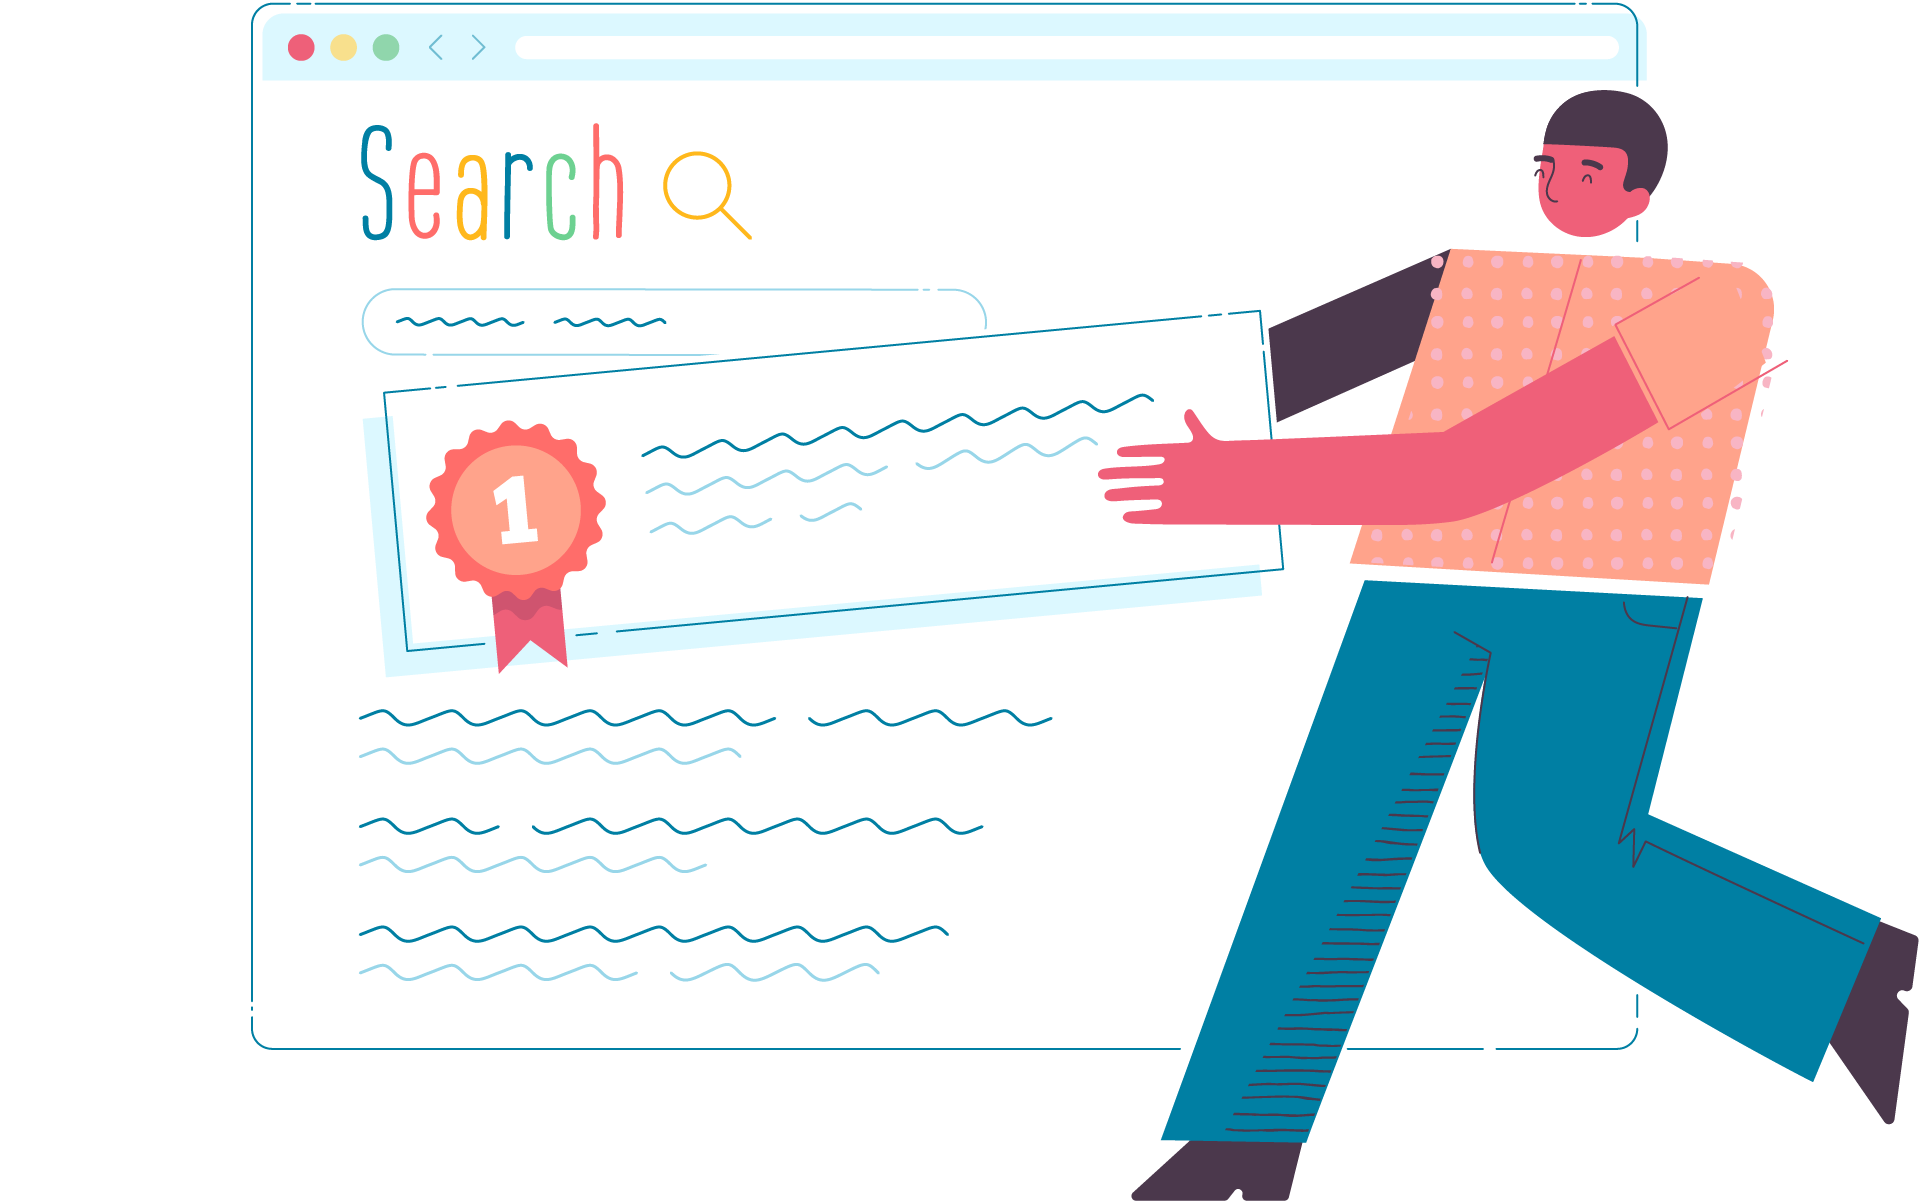 An illustration of a man moving his page to the top of a Google search page